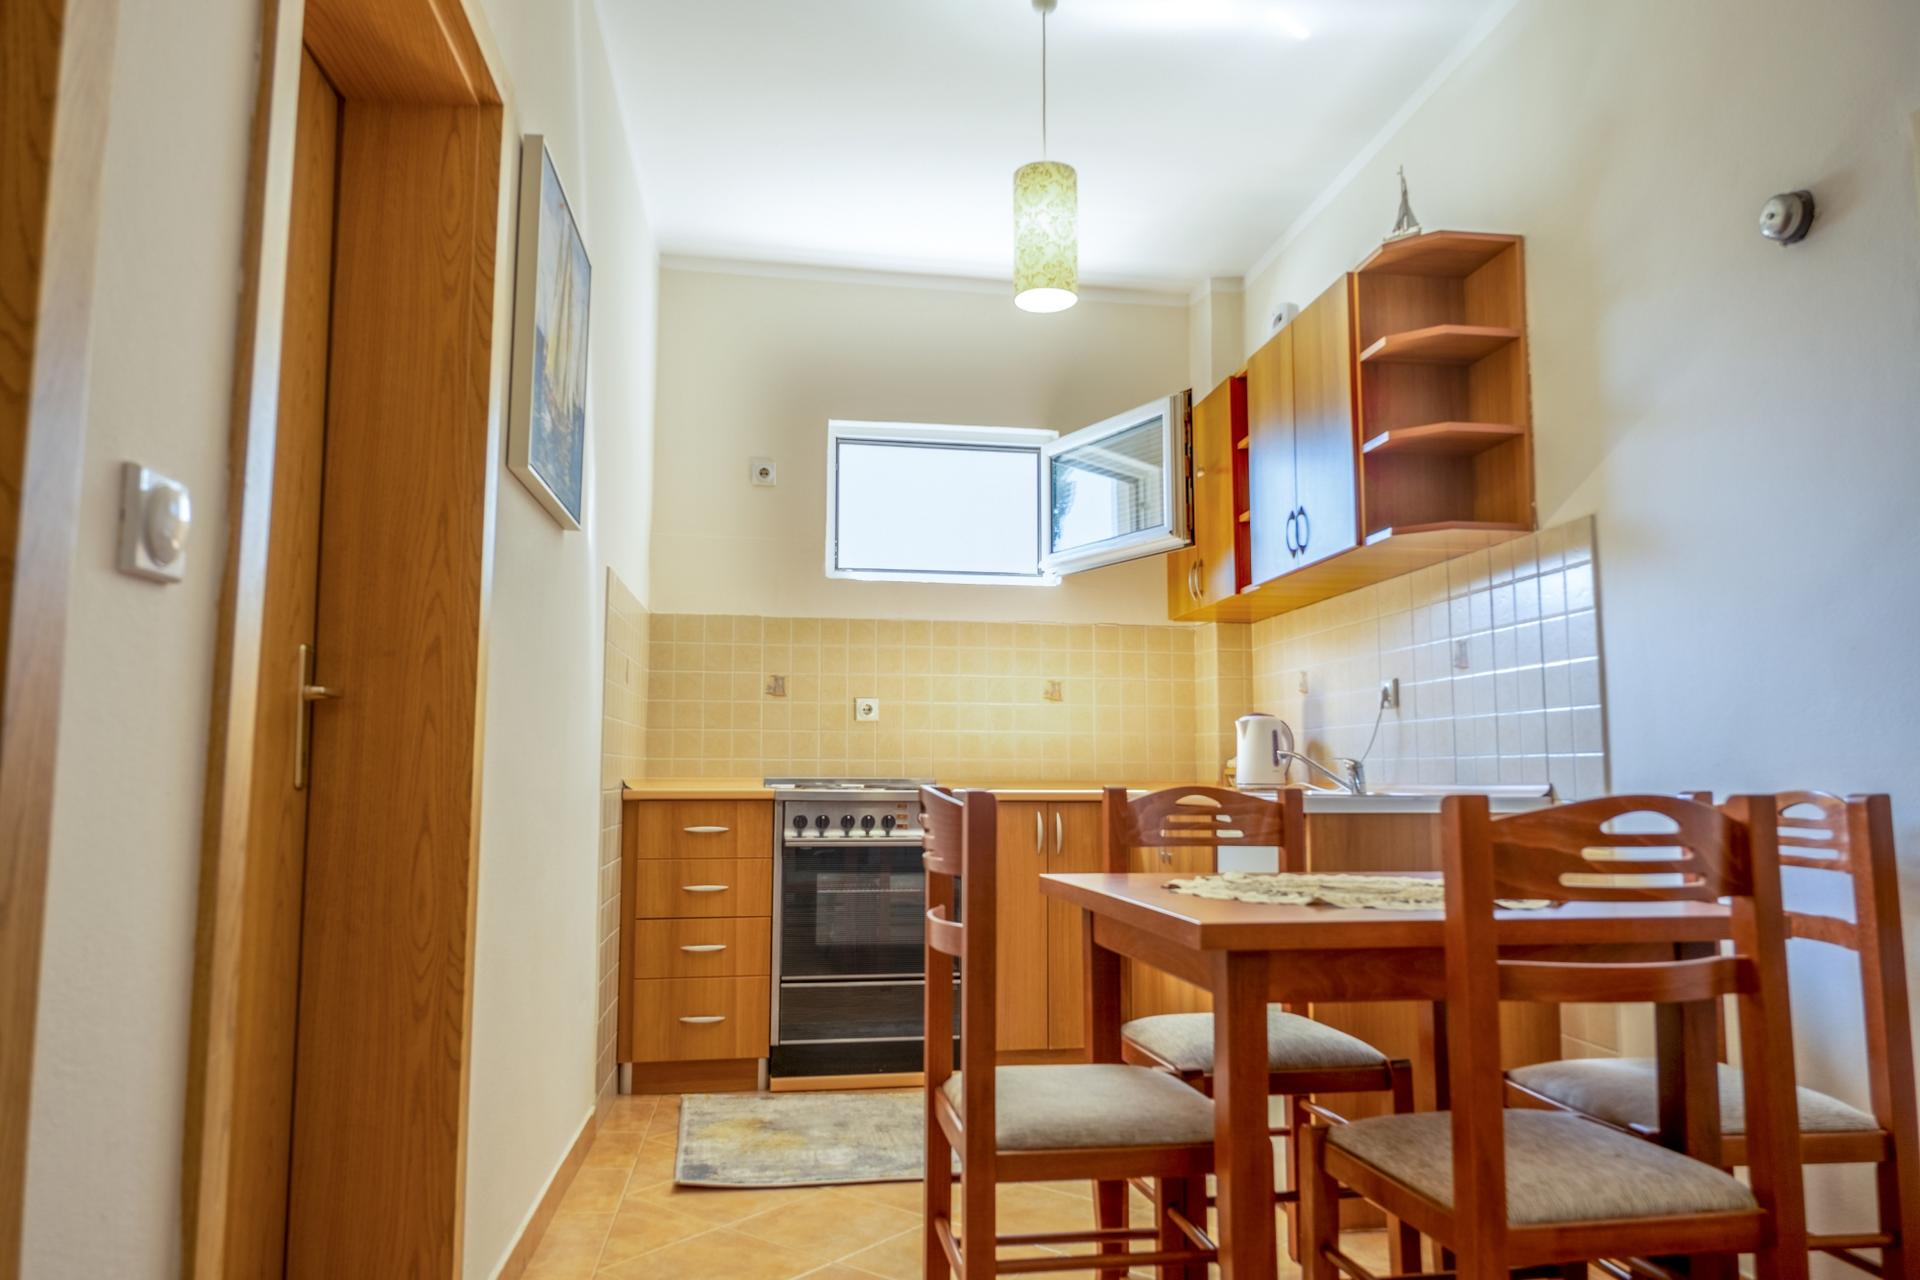 You will have access to a mini fridge, kettle, electric cooktop, and kitchen utensils.